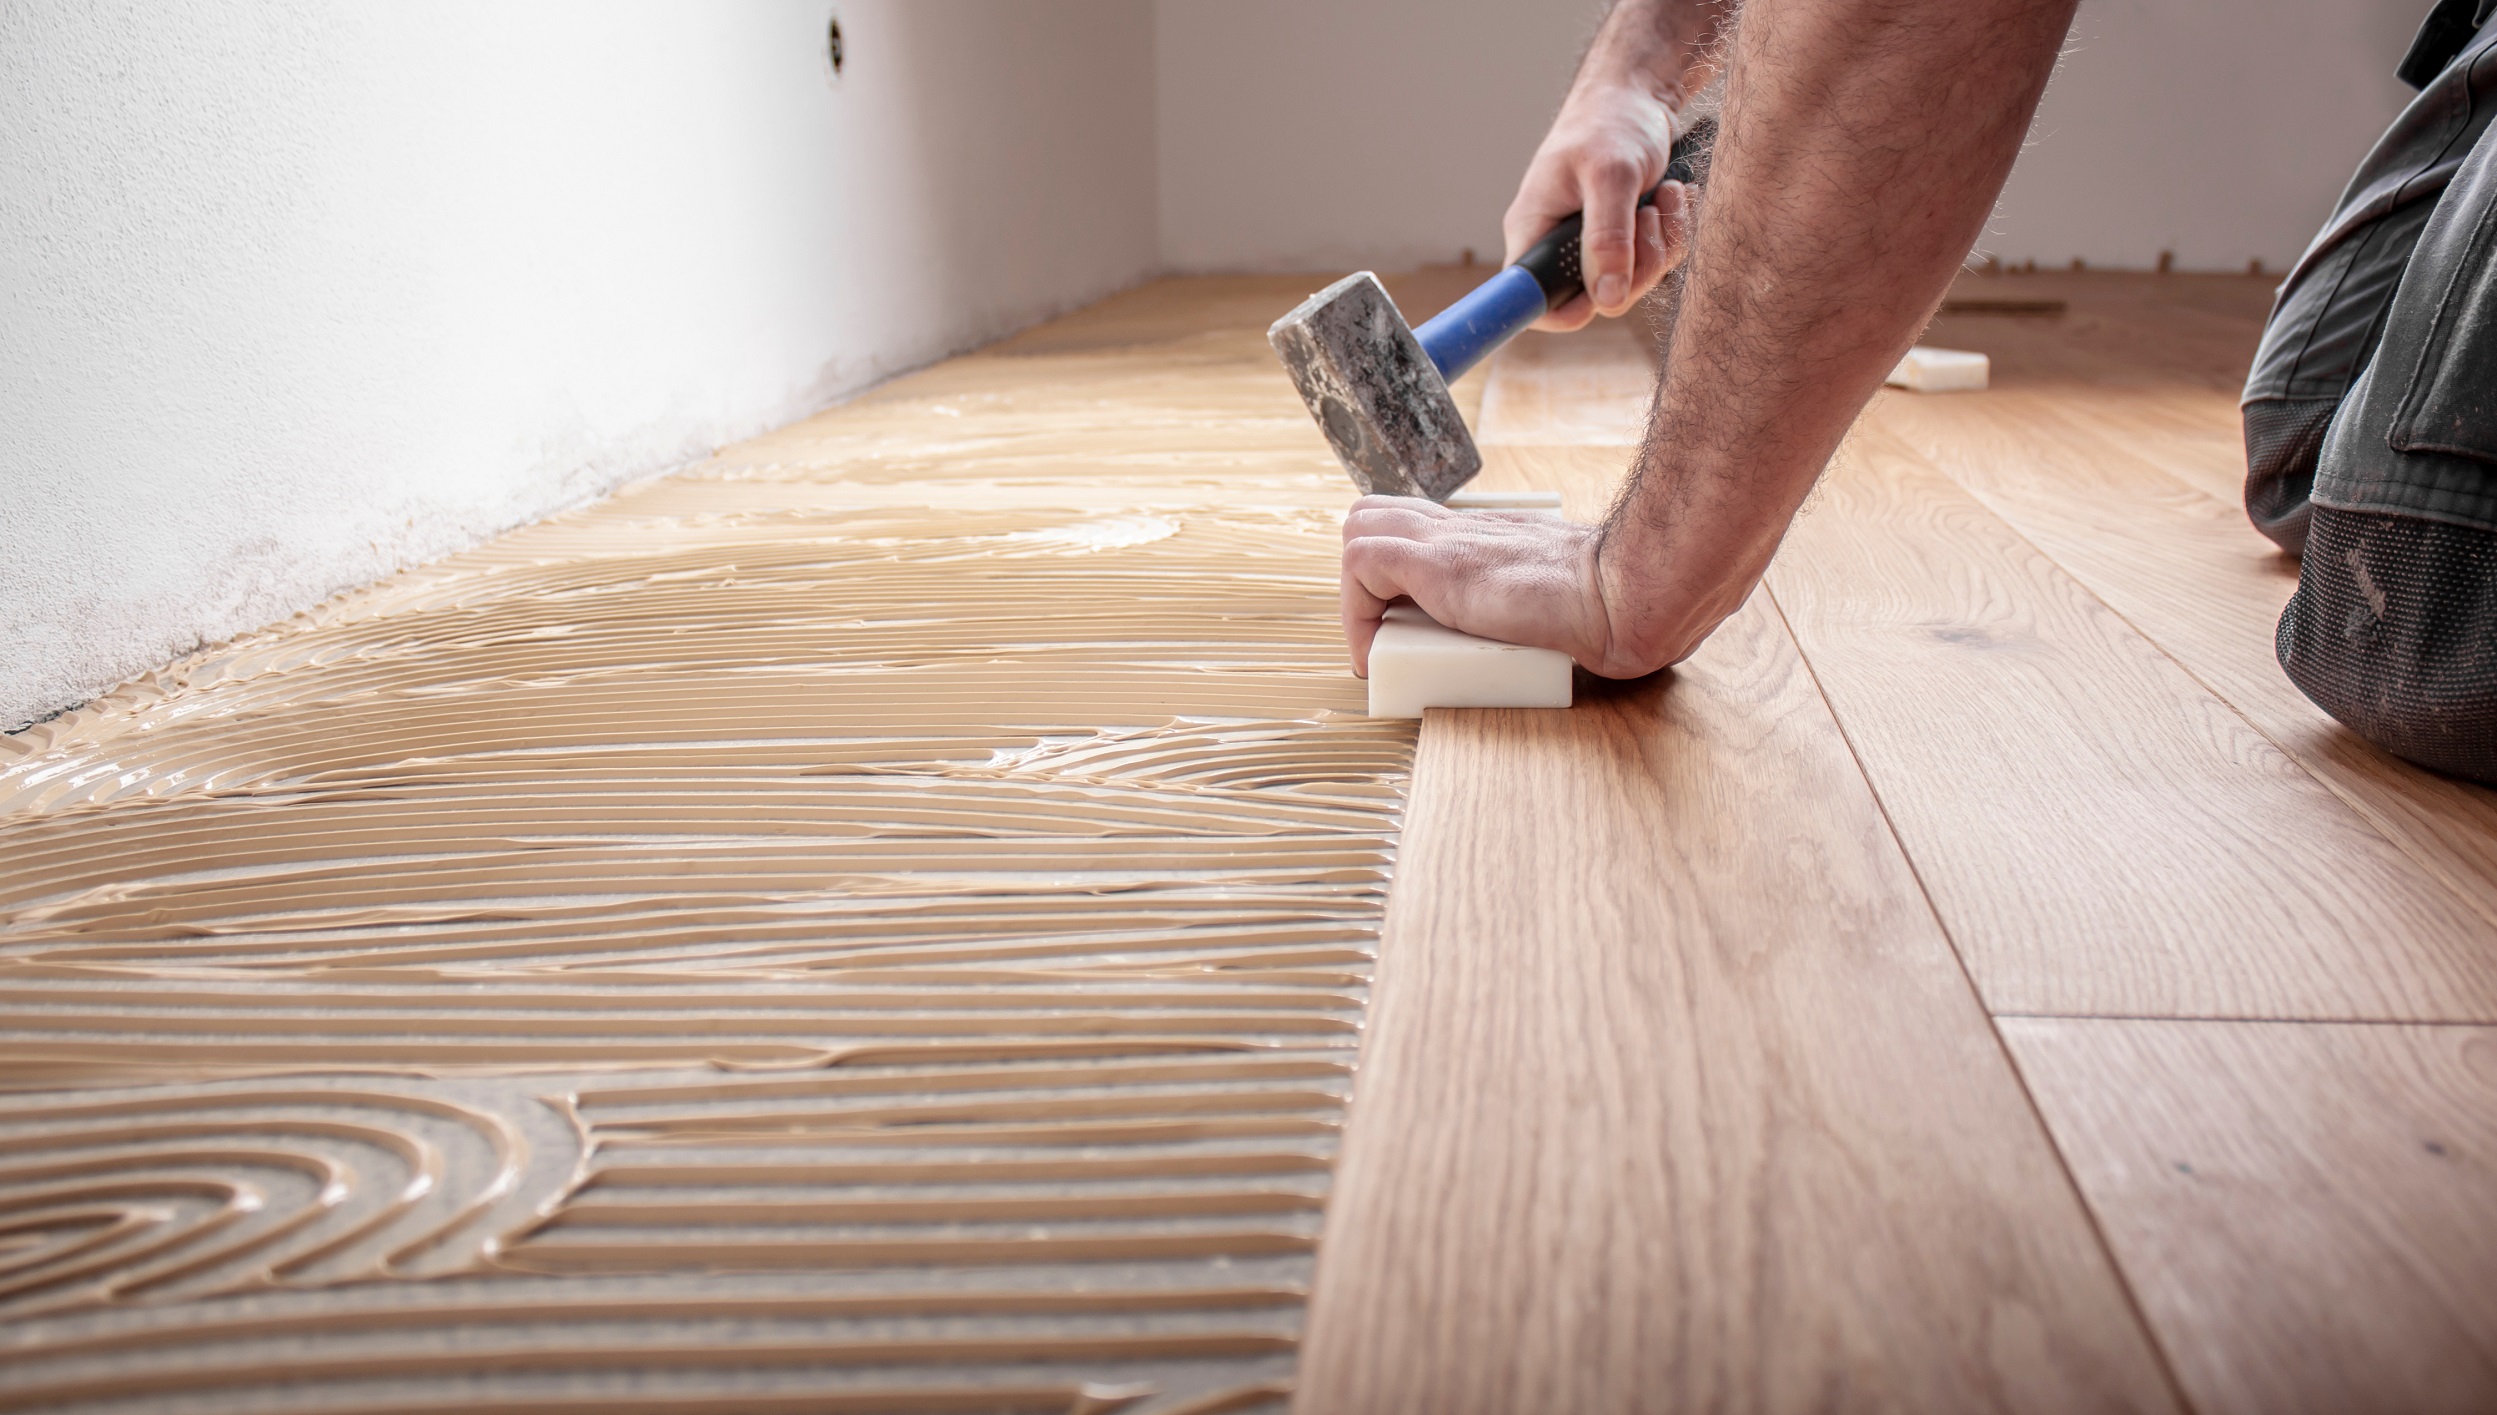 If the flooring in your home has become worn, old, and even damaged, it makes sense to replace it as signs of wear and tear will most likely chip away at your home’s value